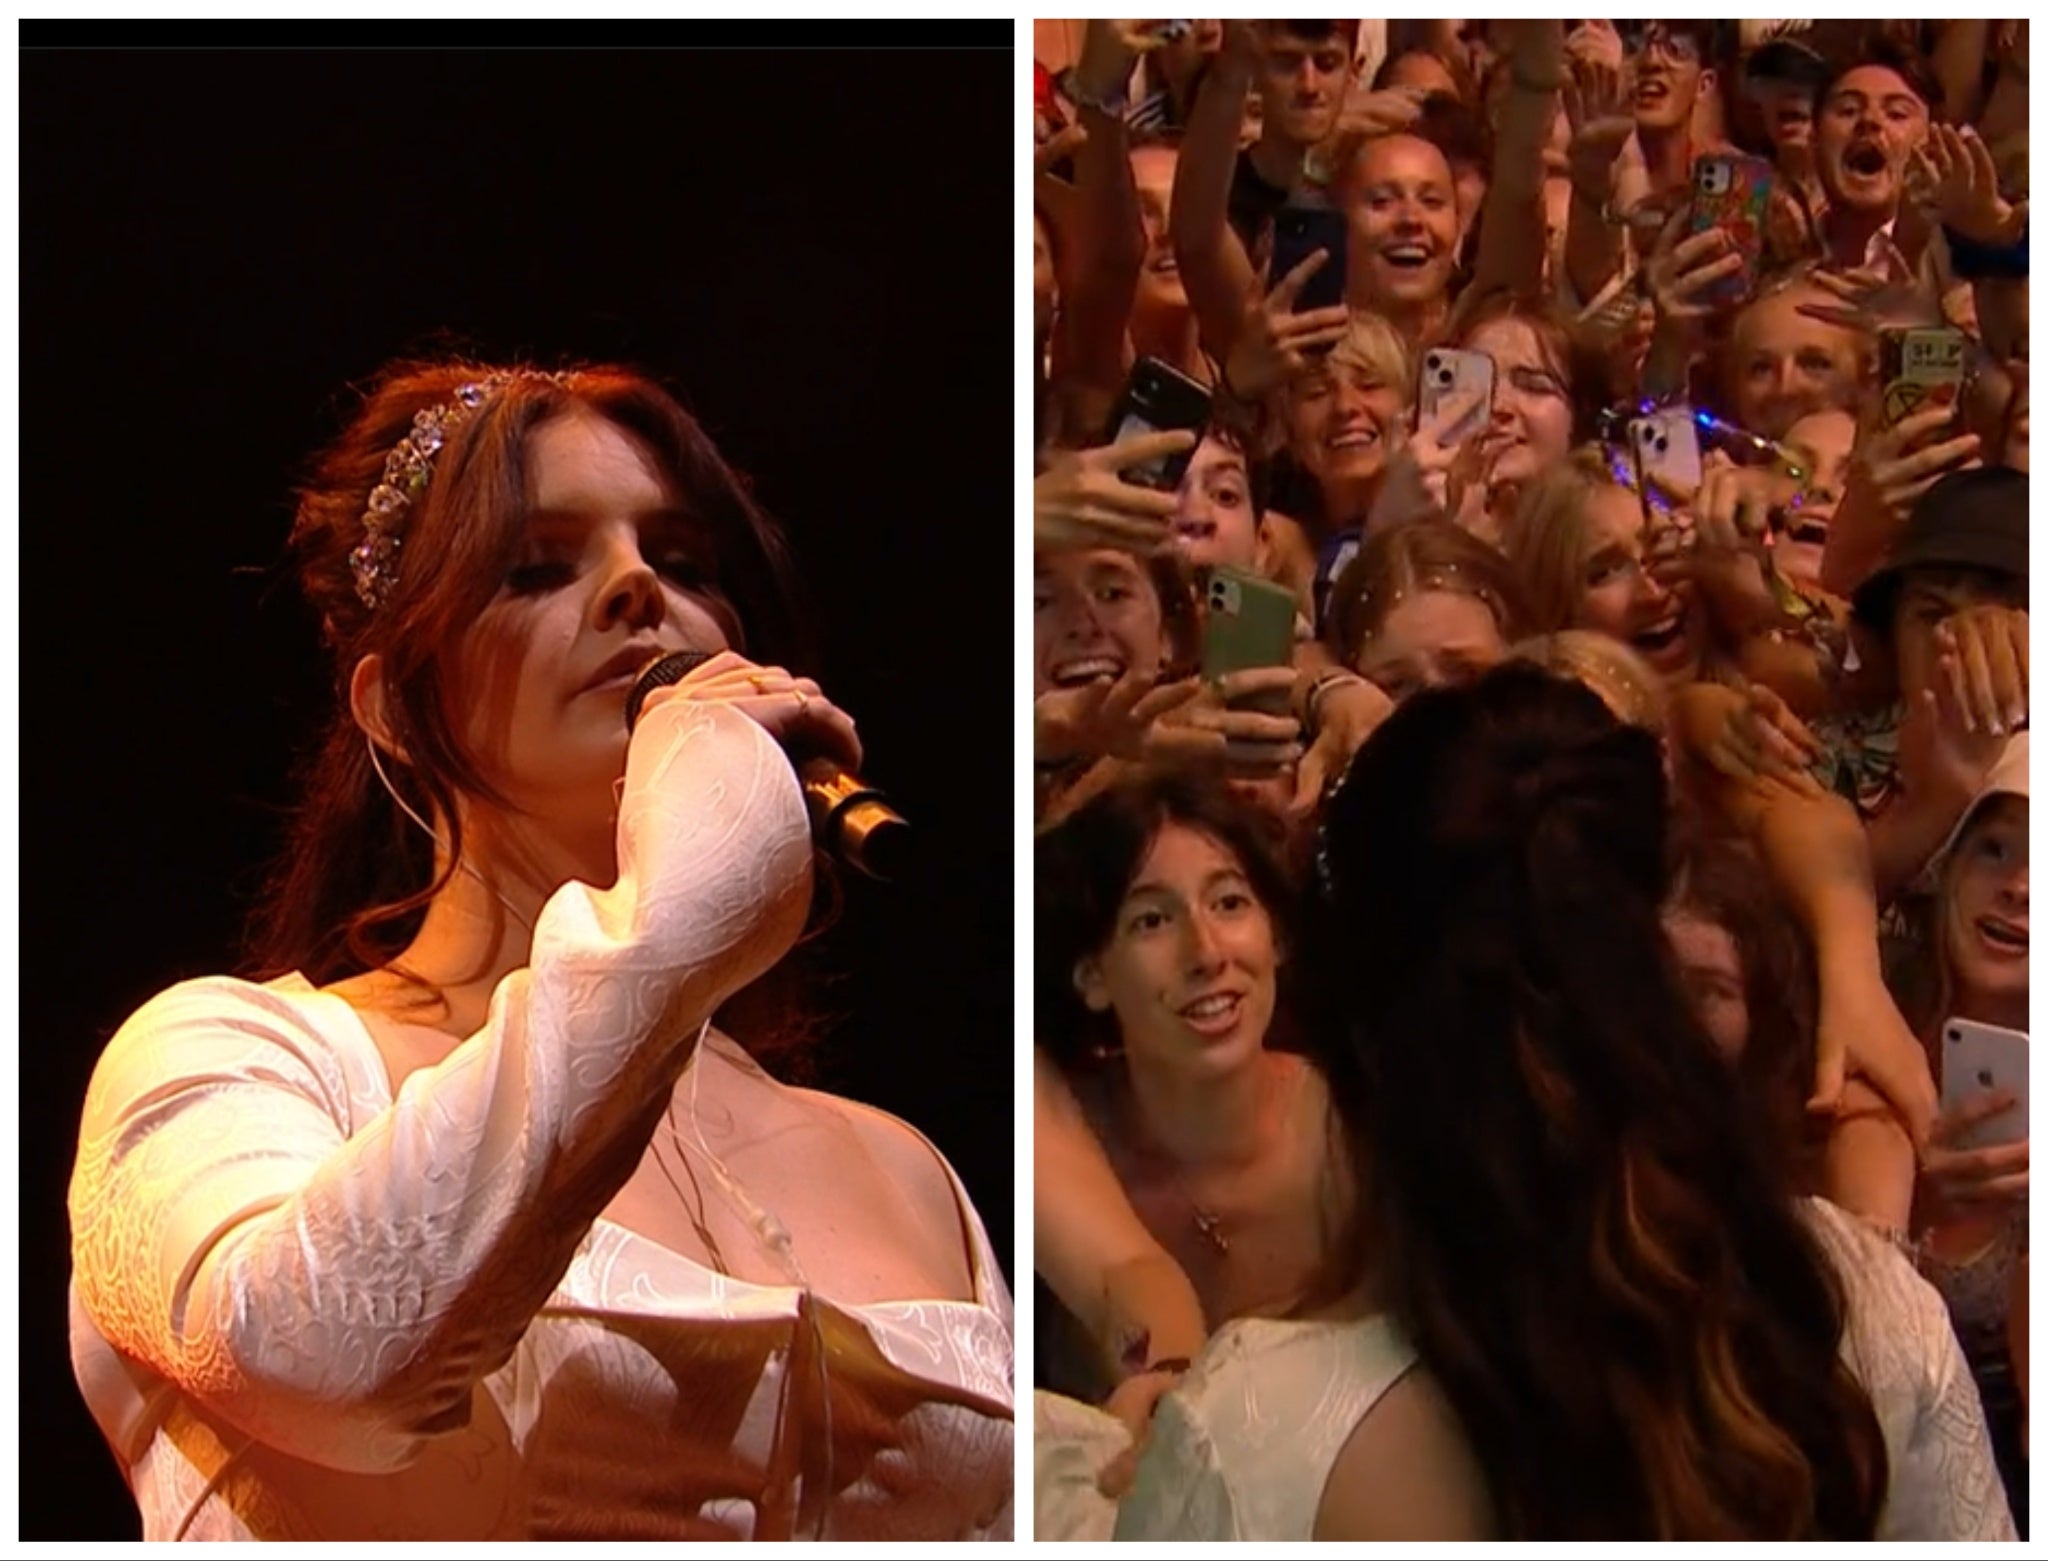 Lana Del Rey went down to the barriers to apologise to her fans after her set was cut short by Glastonbury organisers